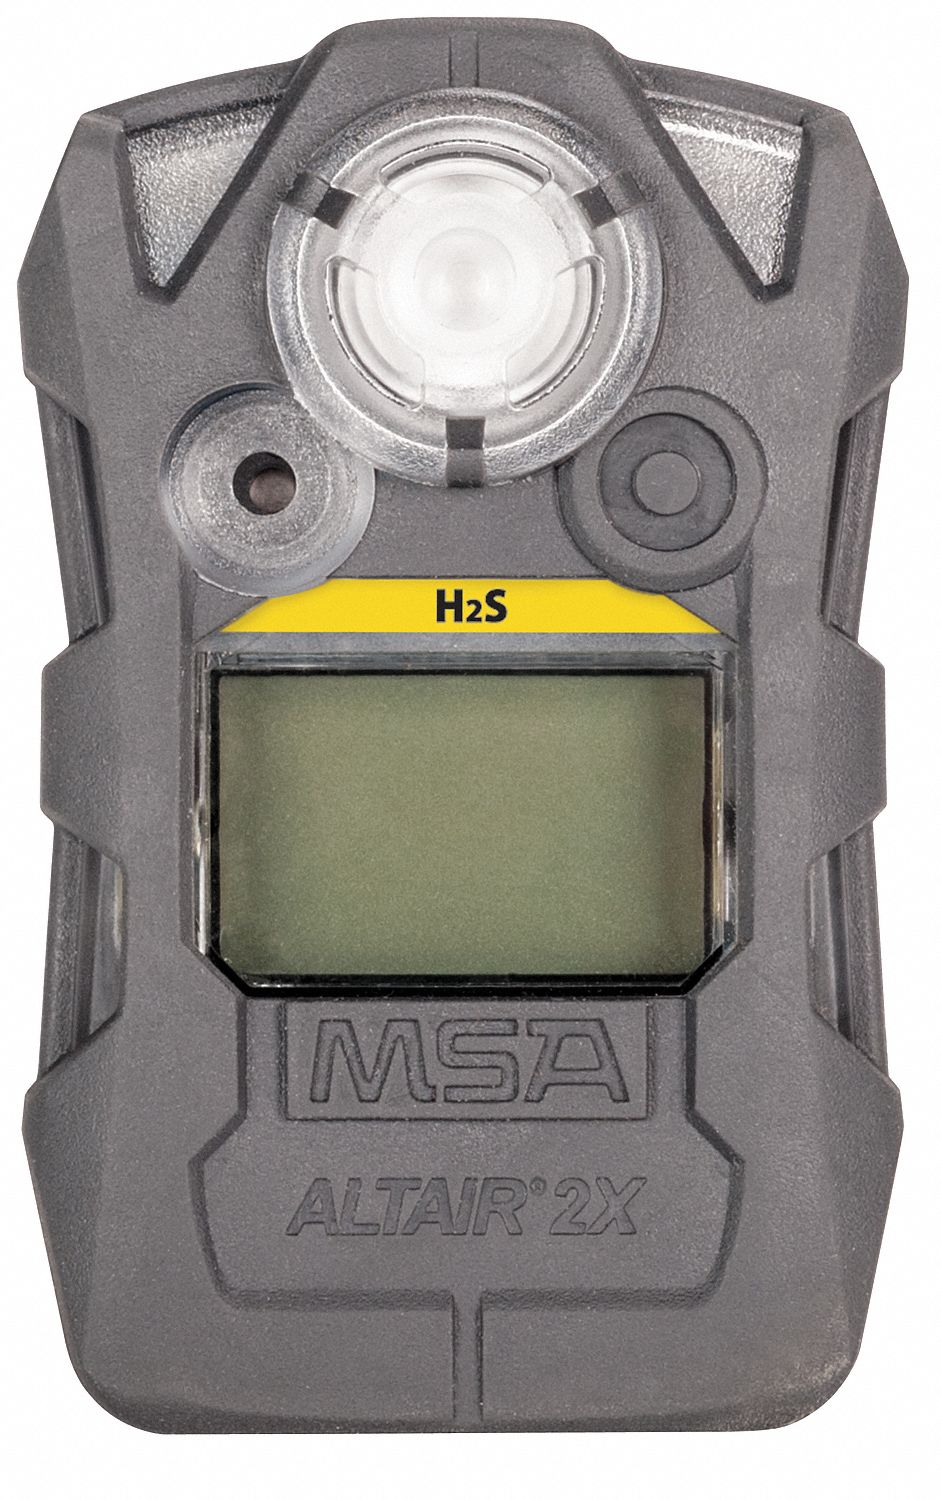 33RJ36 - Gas Detector Gray H2S 0 to 100 ppm